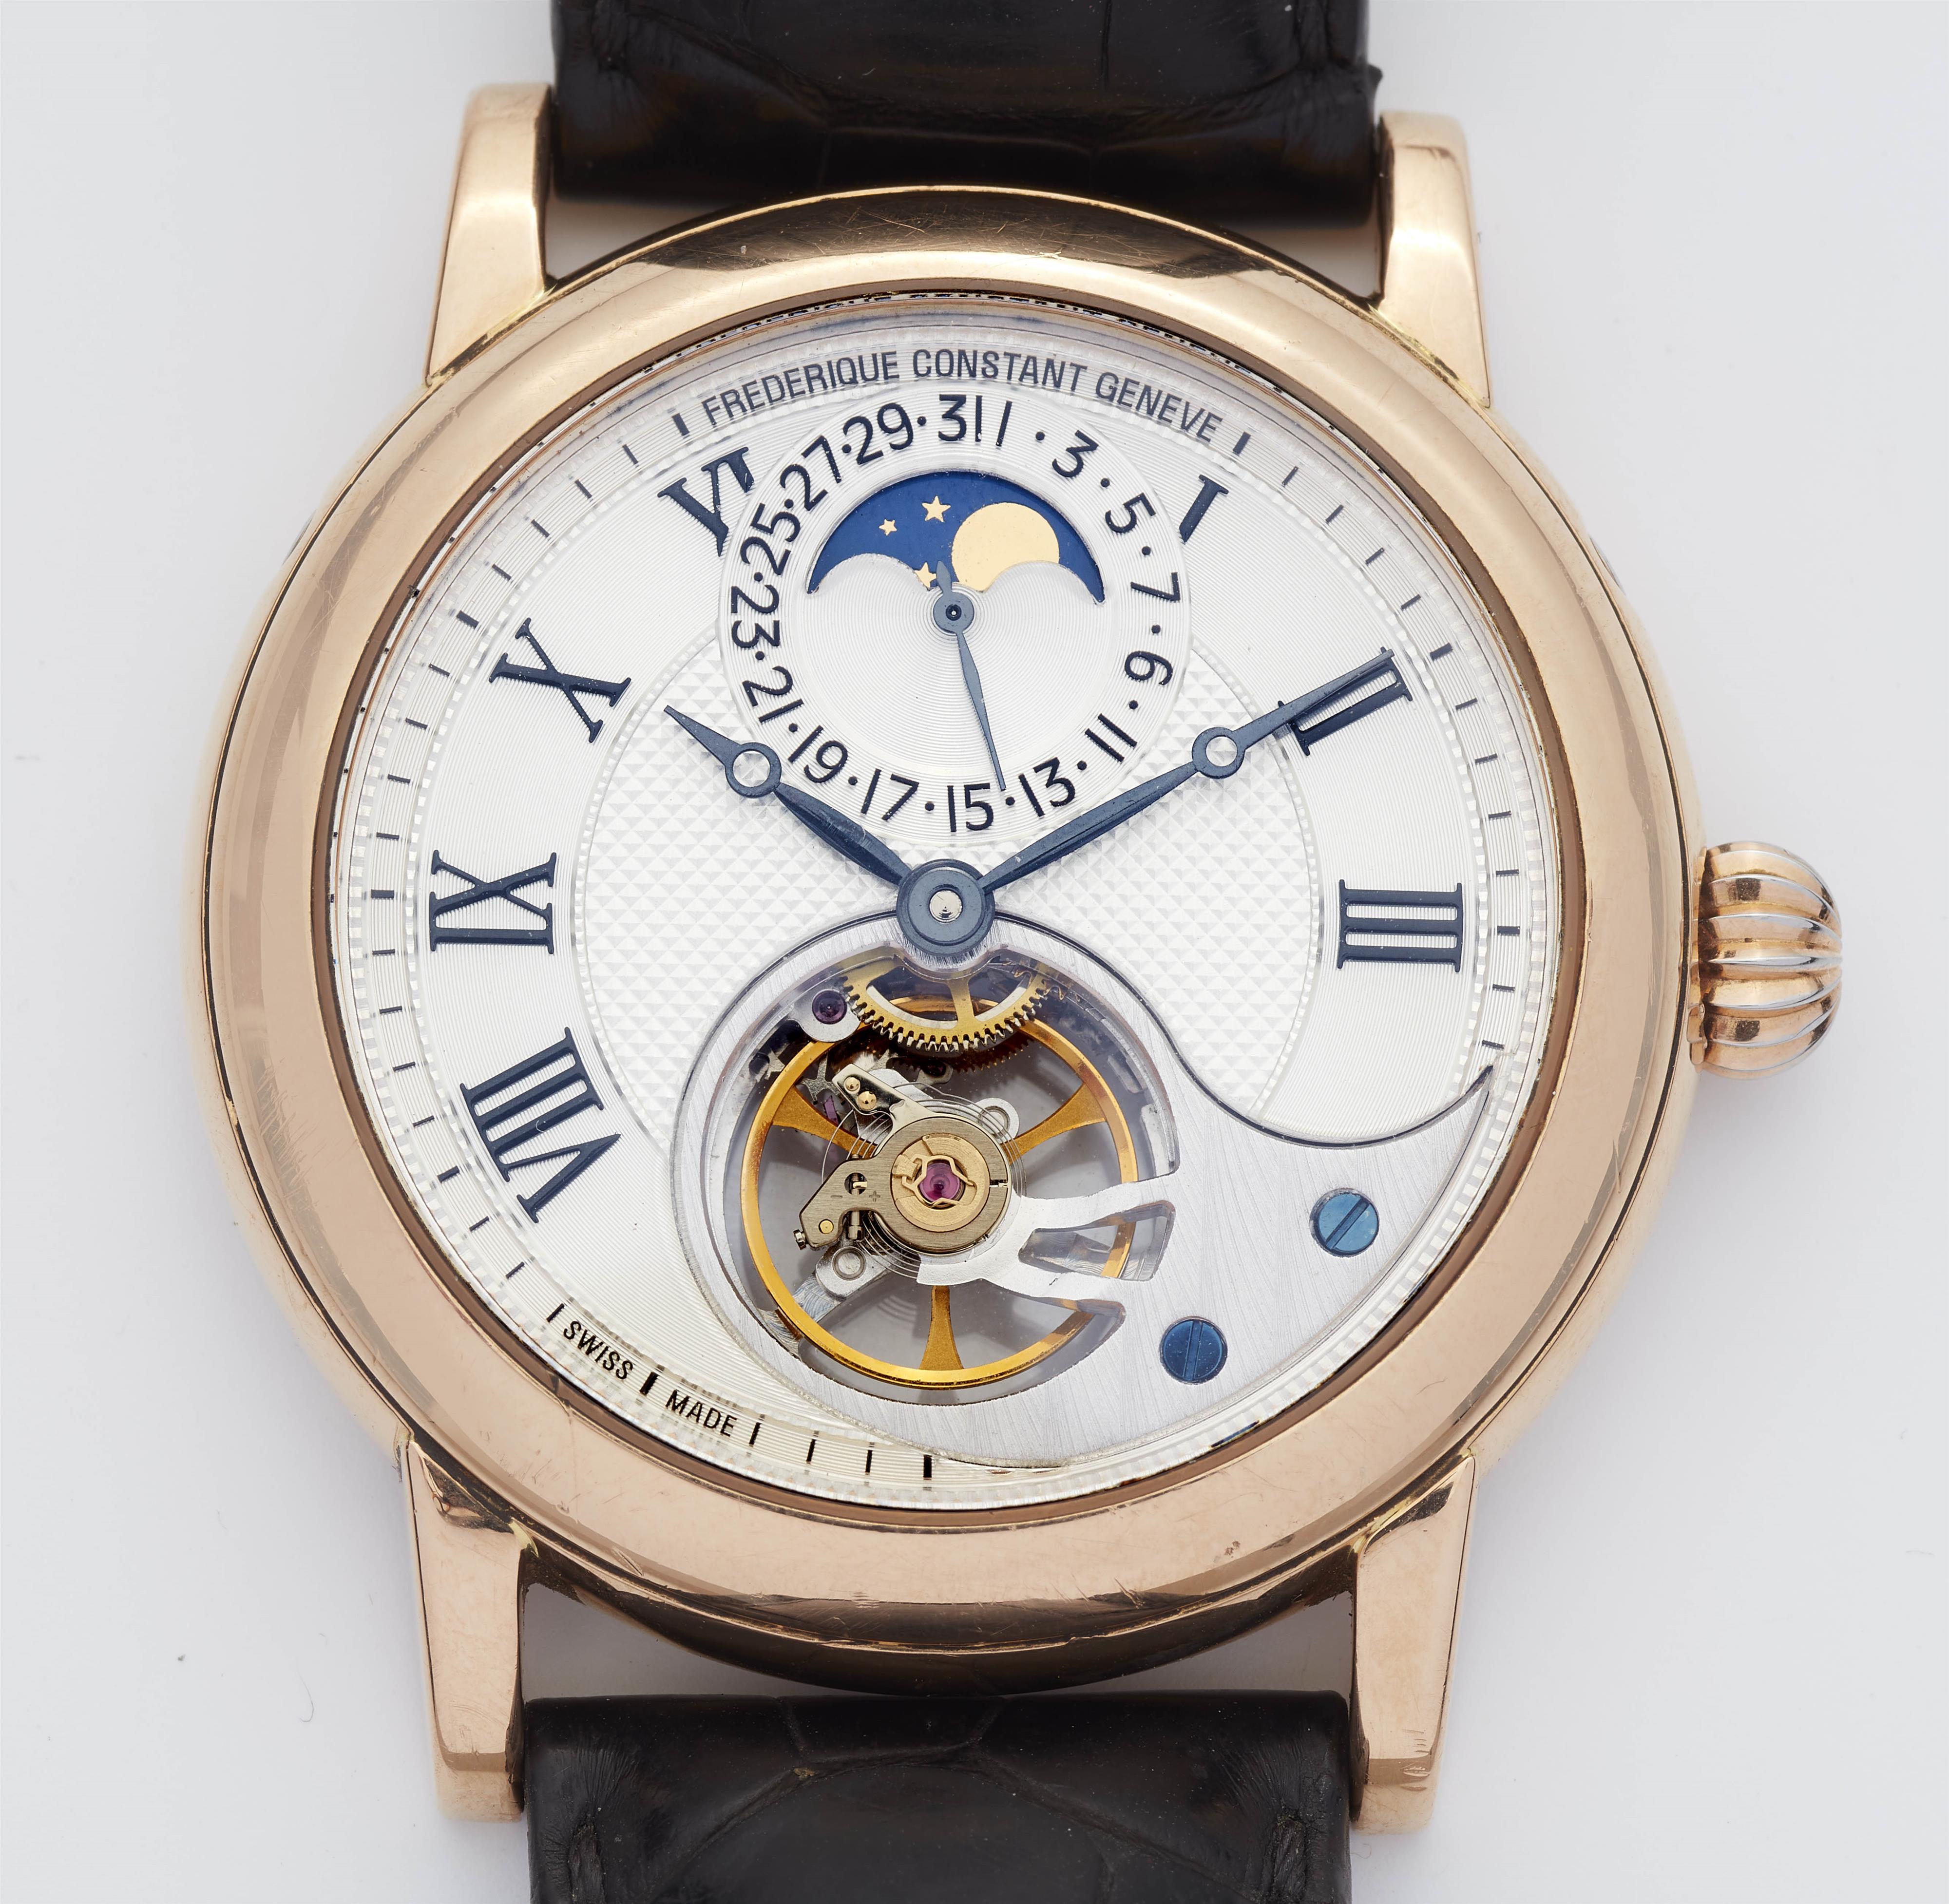 Frederique Constant Heart Beat Manufacture Limited Edition 059/188 - image-4